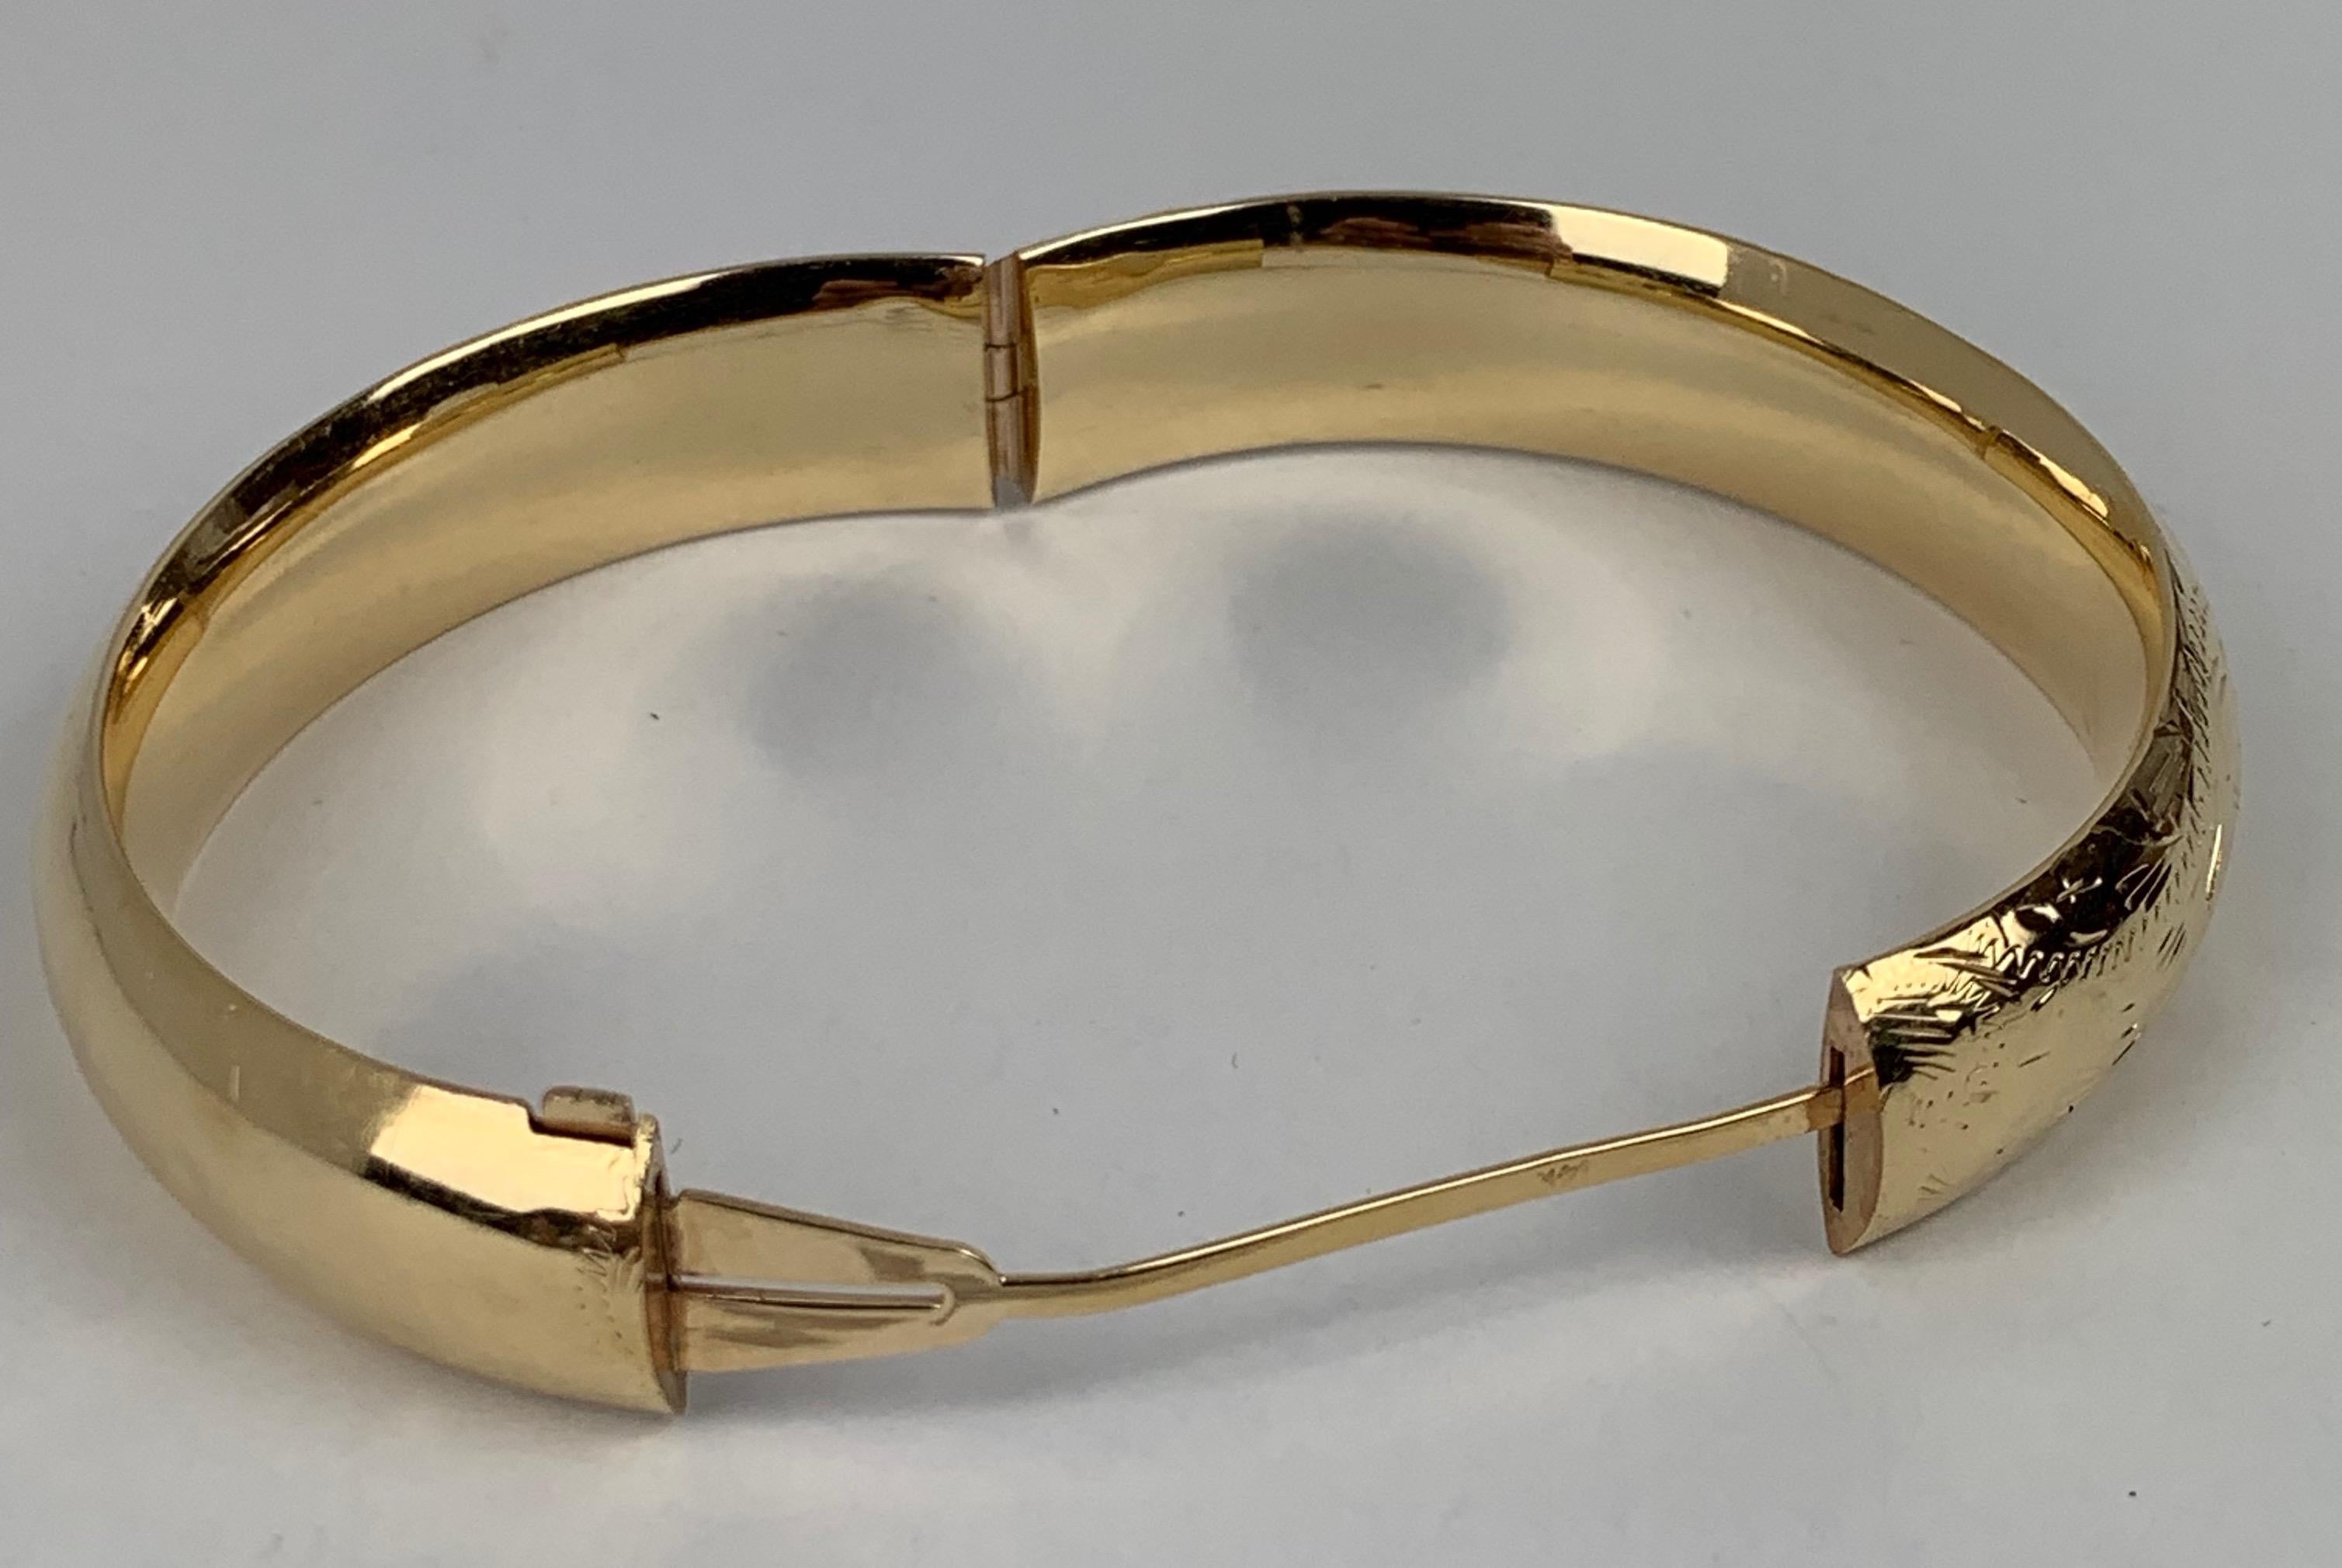 1950's 14k yellow gold bangle bracelet, slightly domed and hand engraved.  The area for monogramming has been left untouched.  There are several tiny dimples on the underside of the bracelet.  The catch is very tight.

20 grams
inside diameter 2